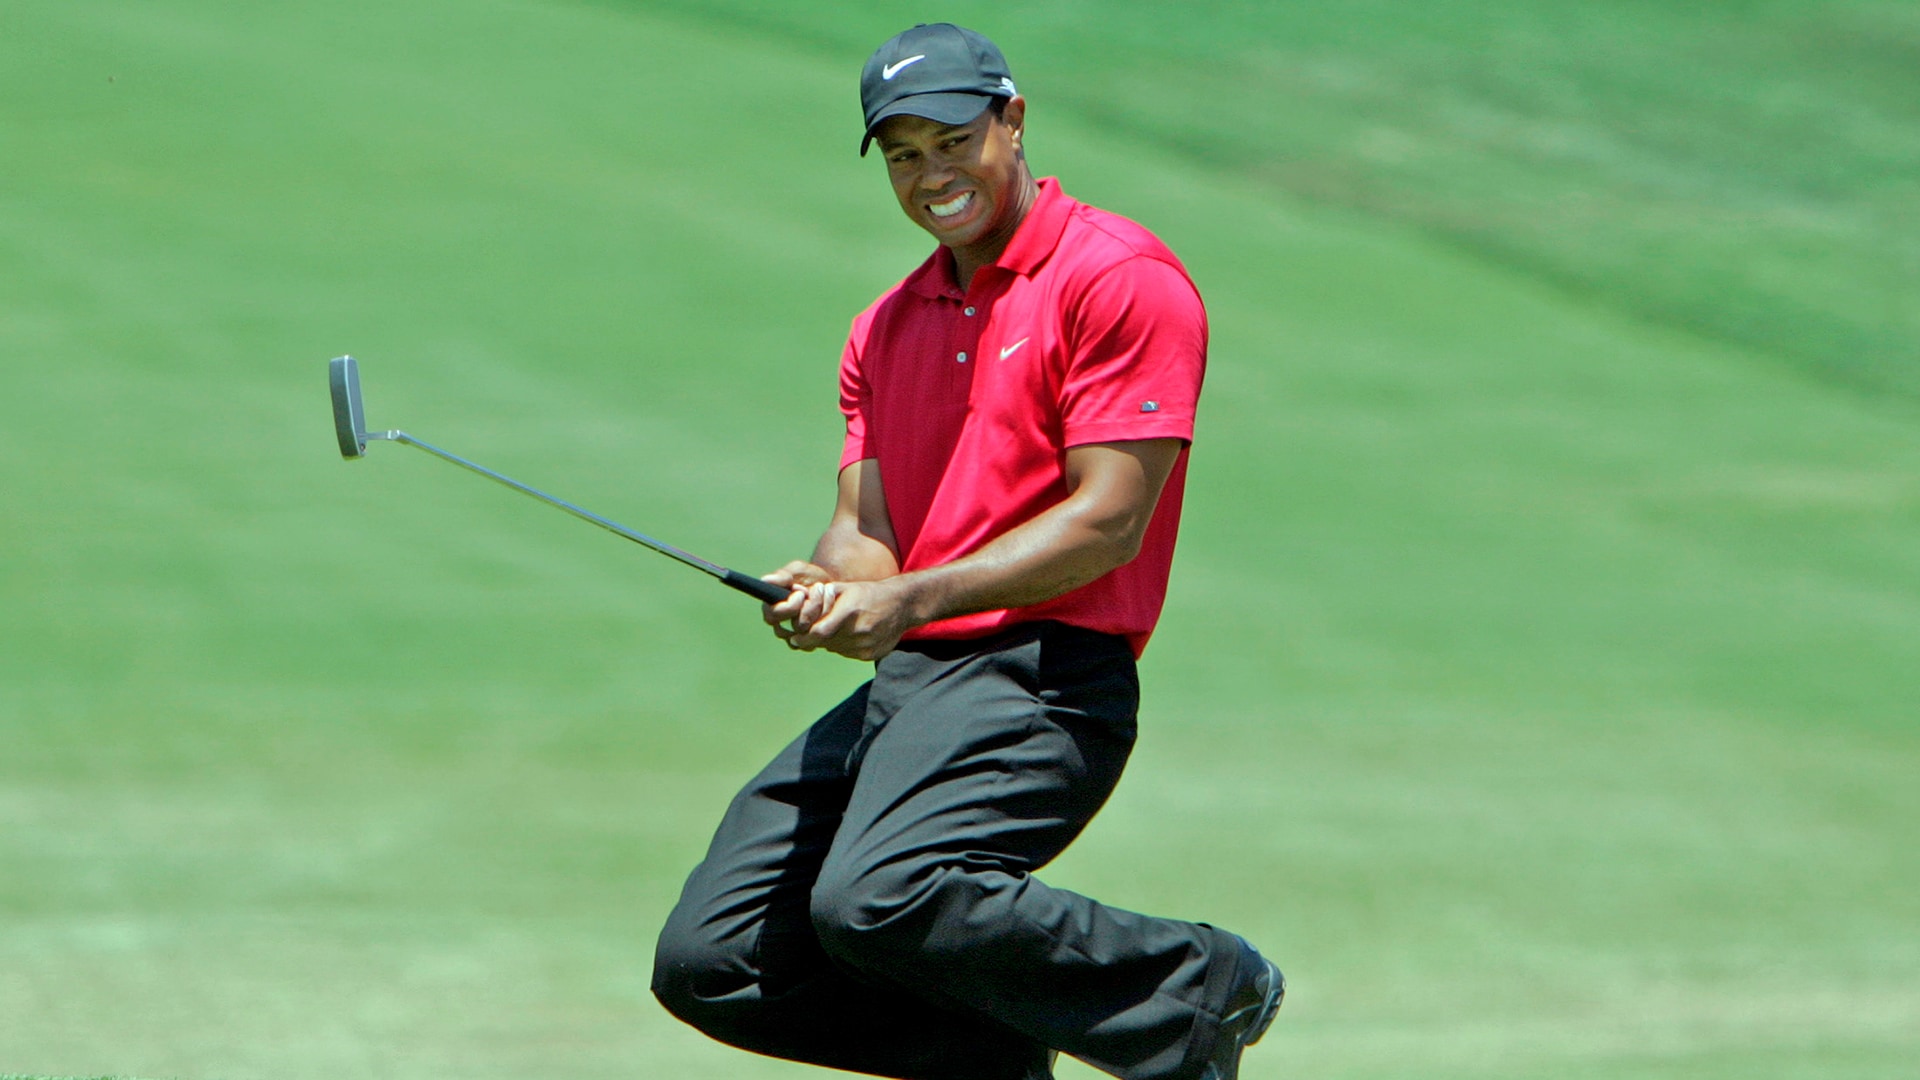 Tiger Woods says this exercise early in his career ‘destroyed’ his body